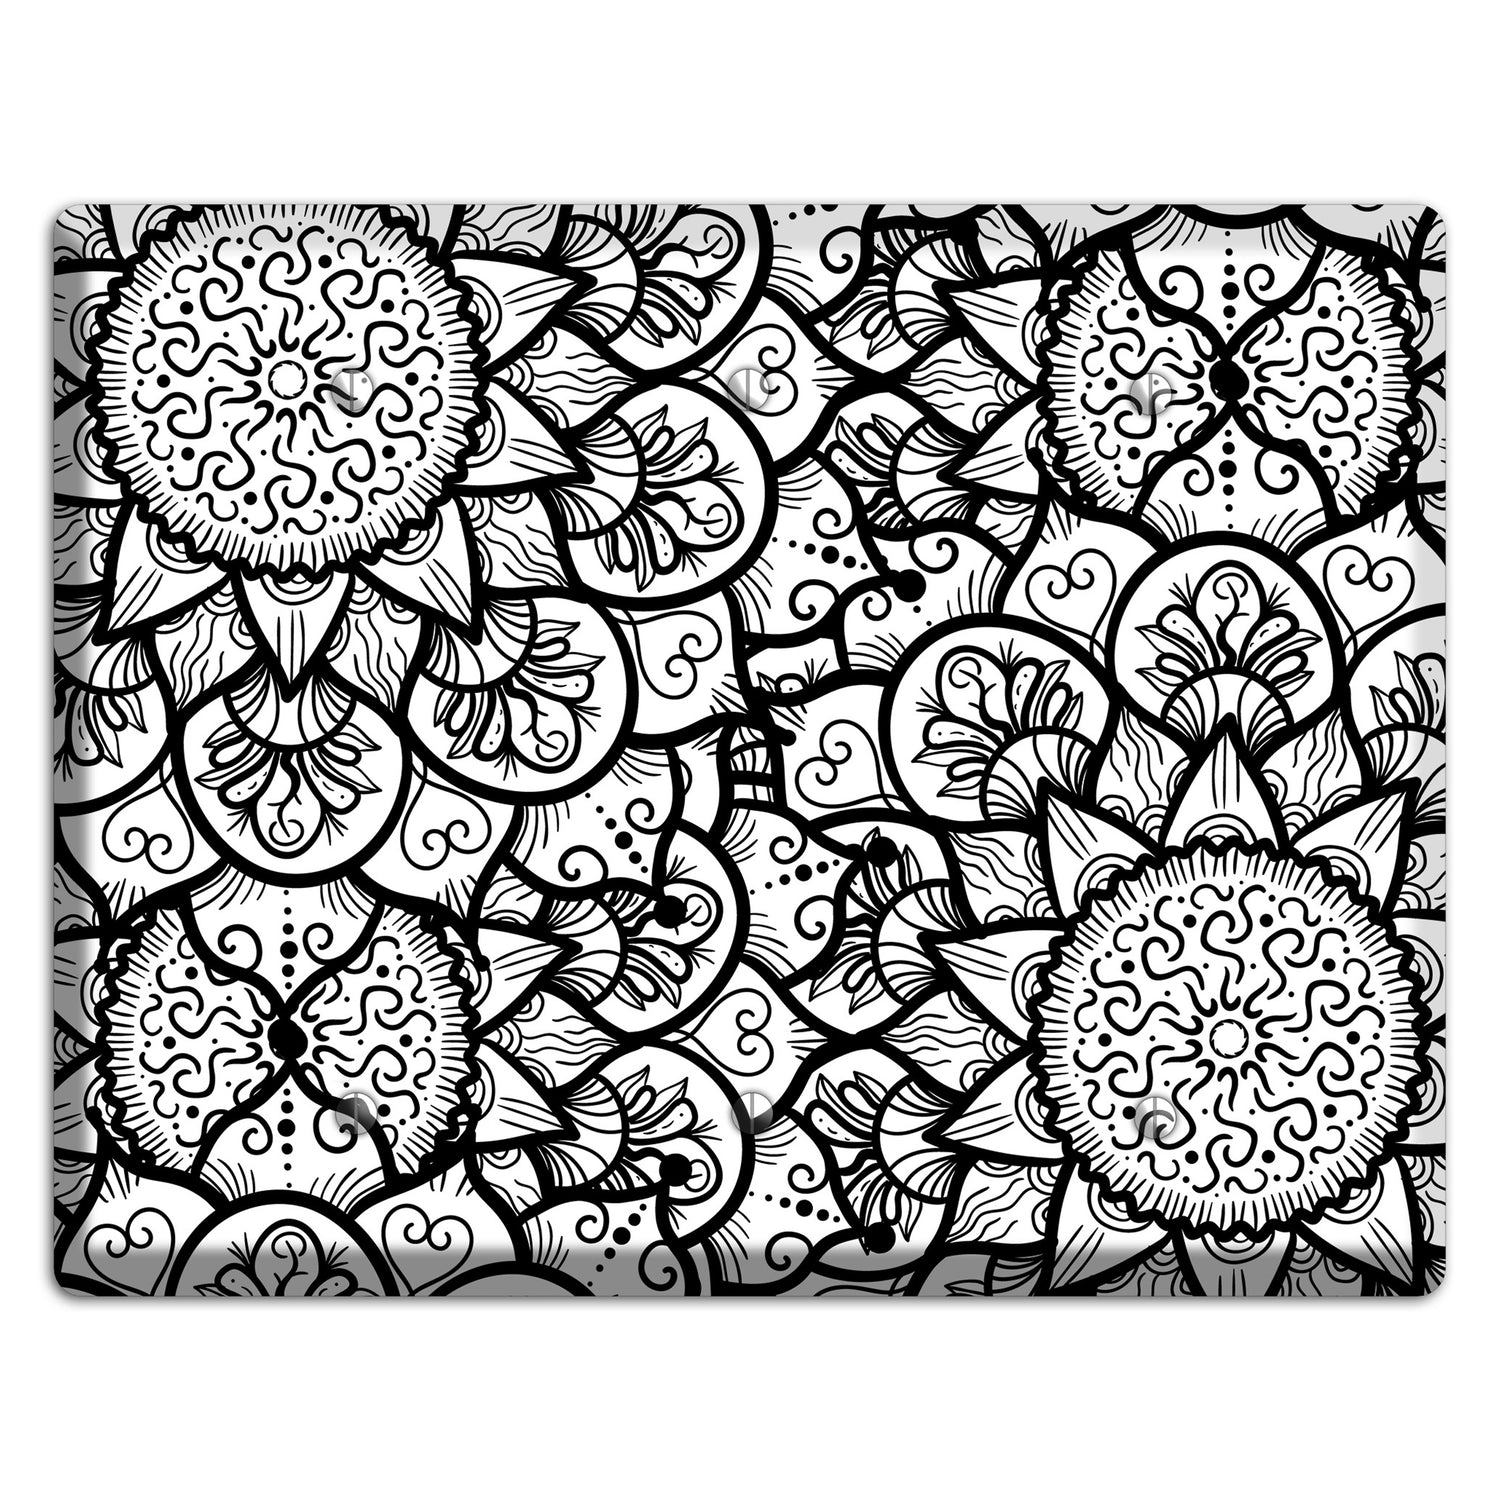 Mandala Black and White Style W Cover Plates 3 Blank Wallplate